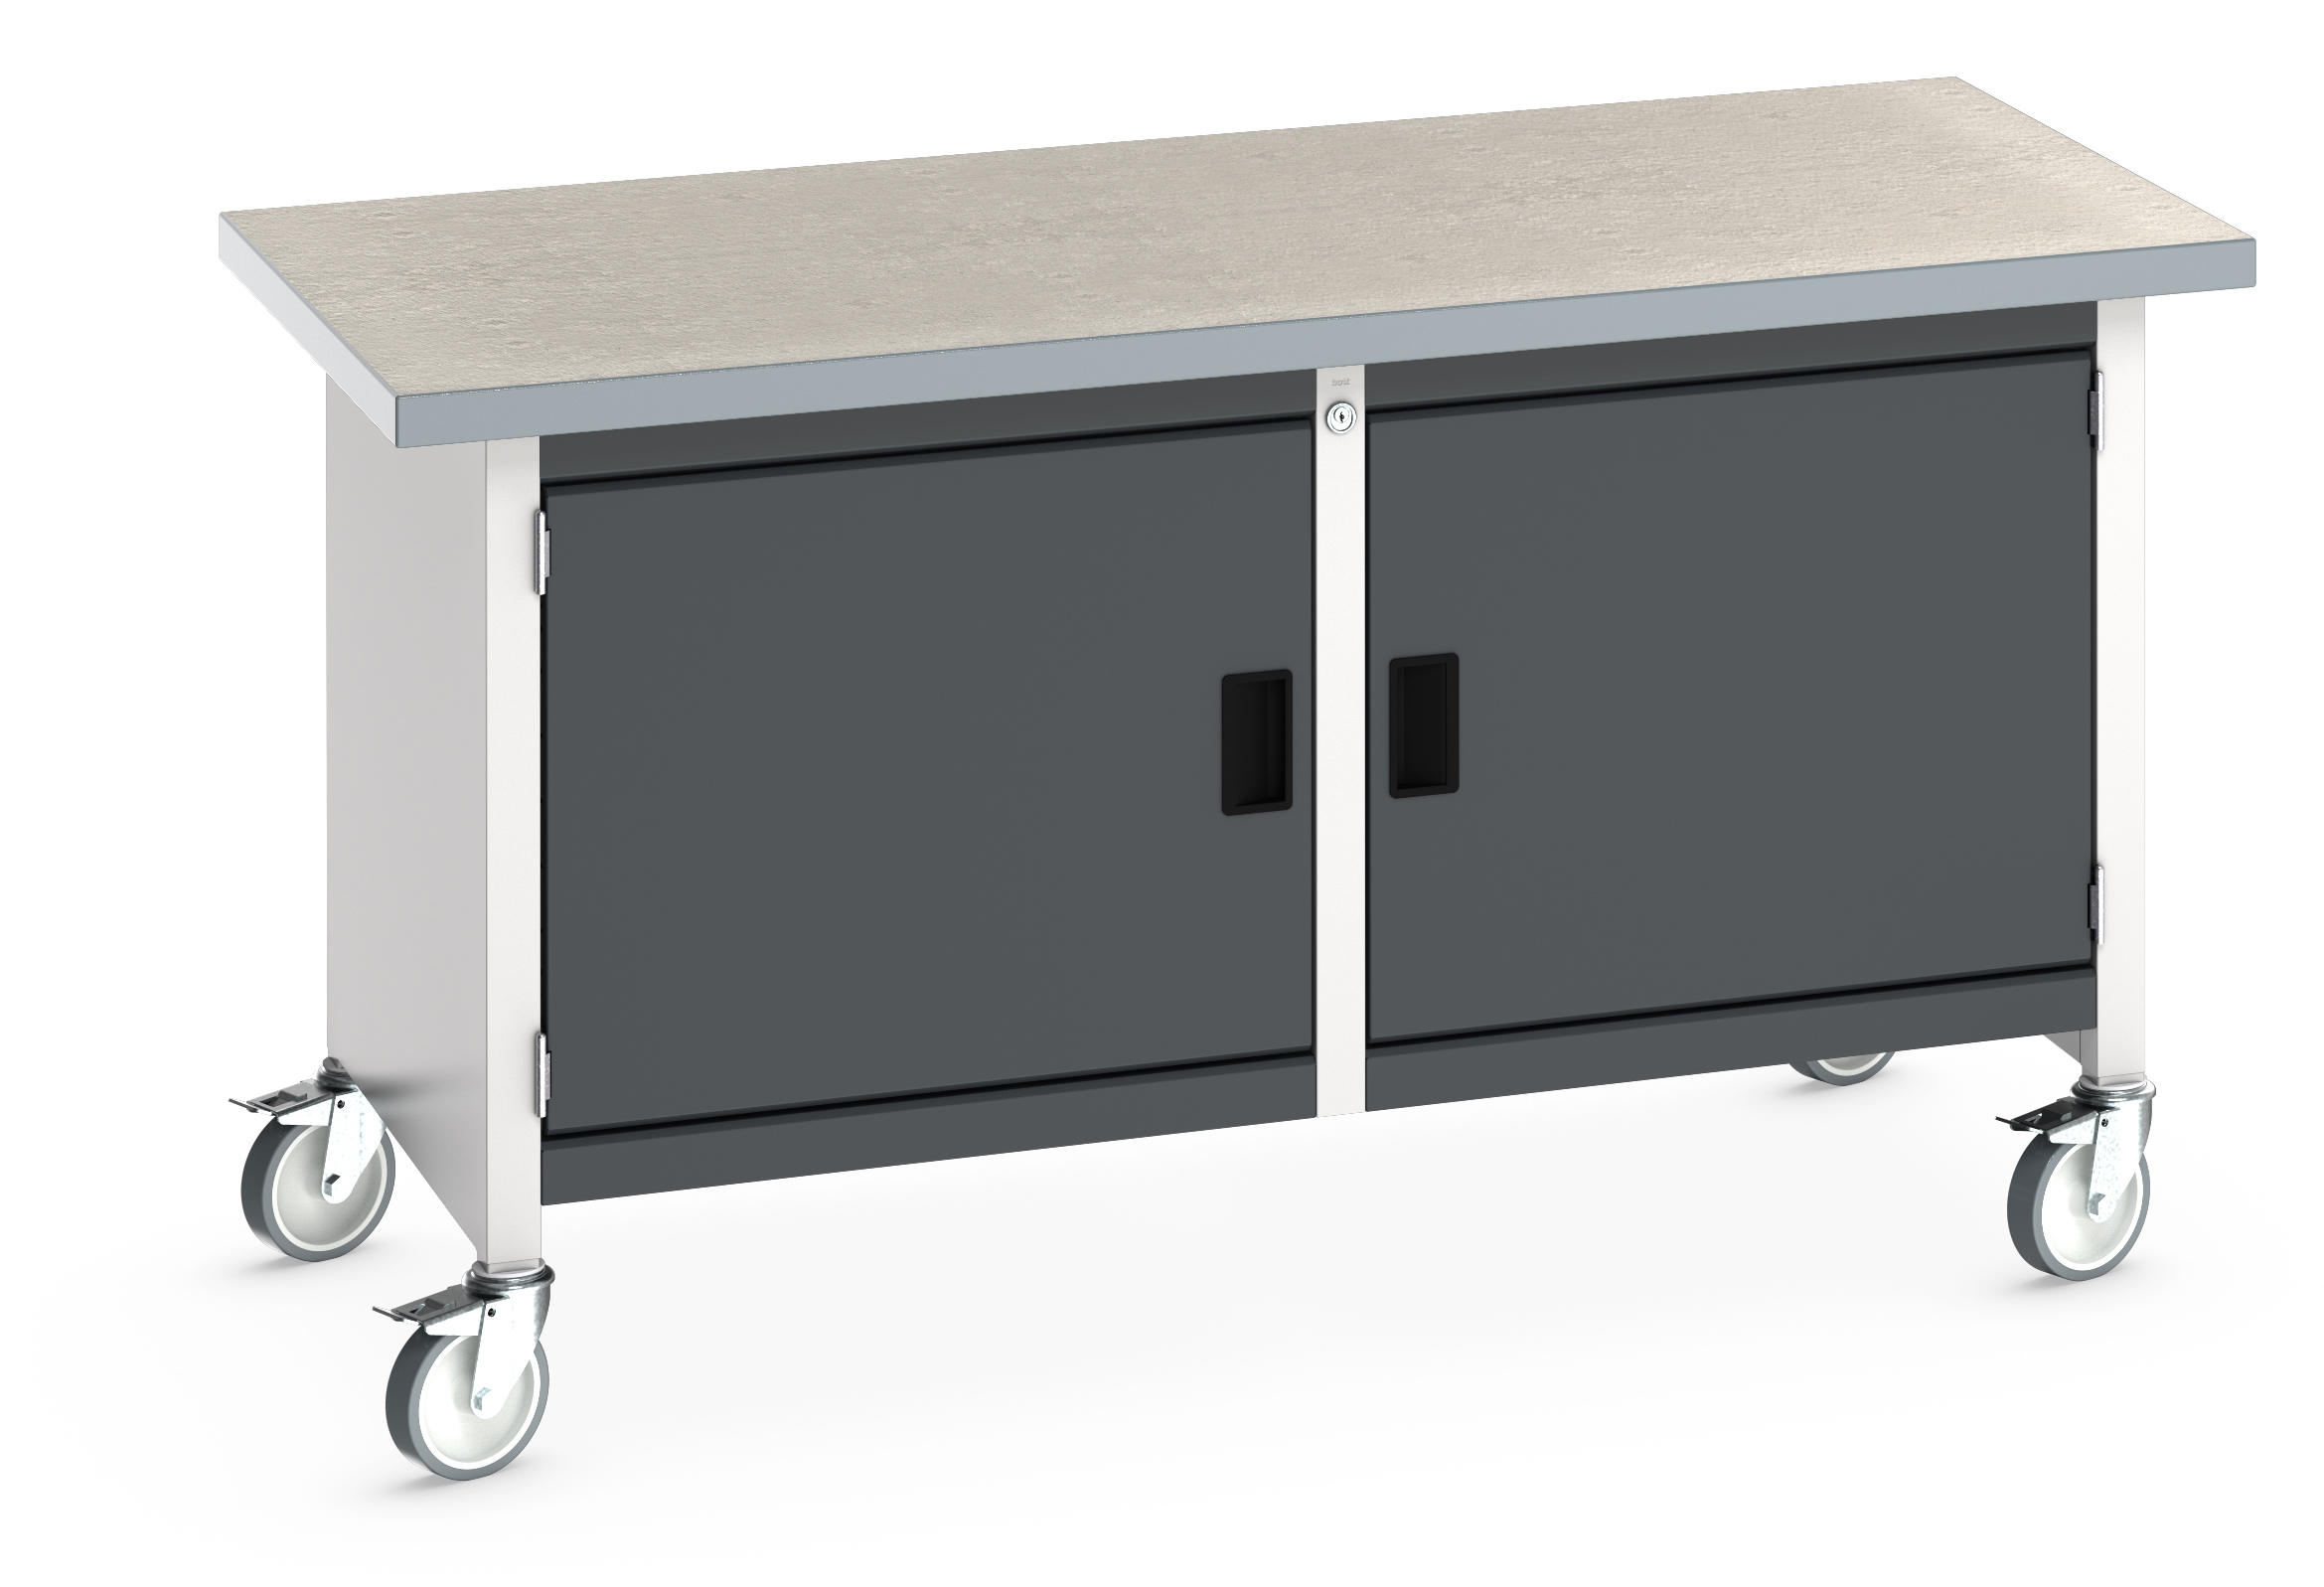 Bott Cubio Mobile Storage Bench With Full Cupboard / Full Cupboard - 41002099.19V